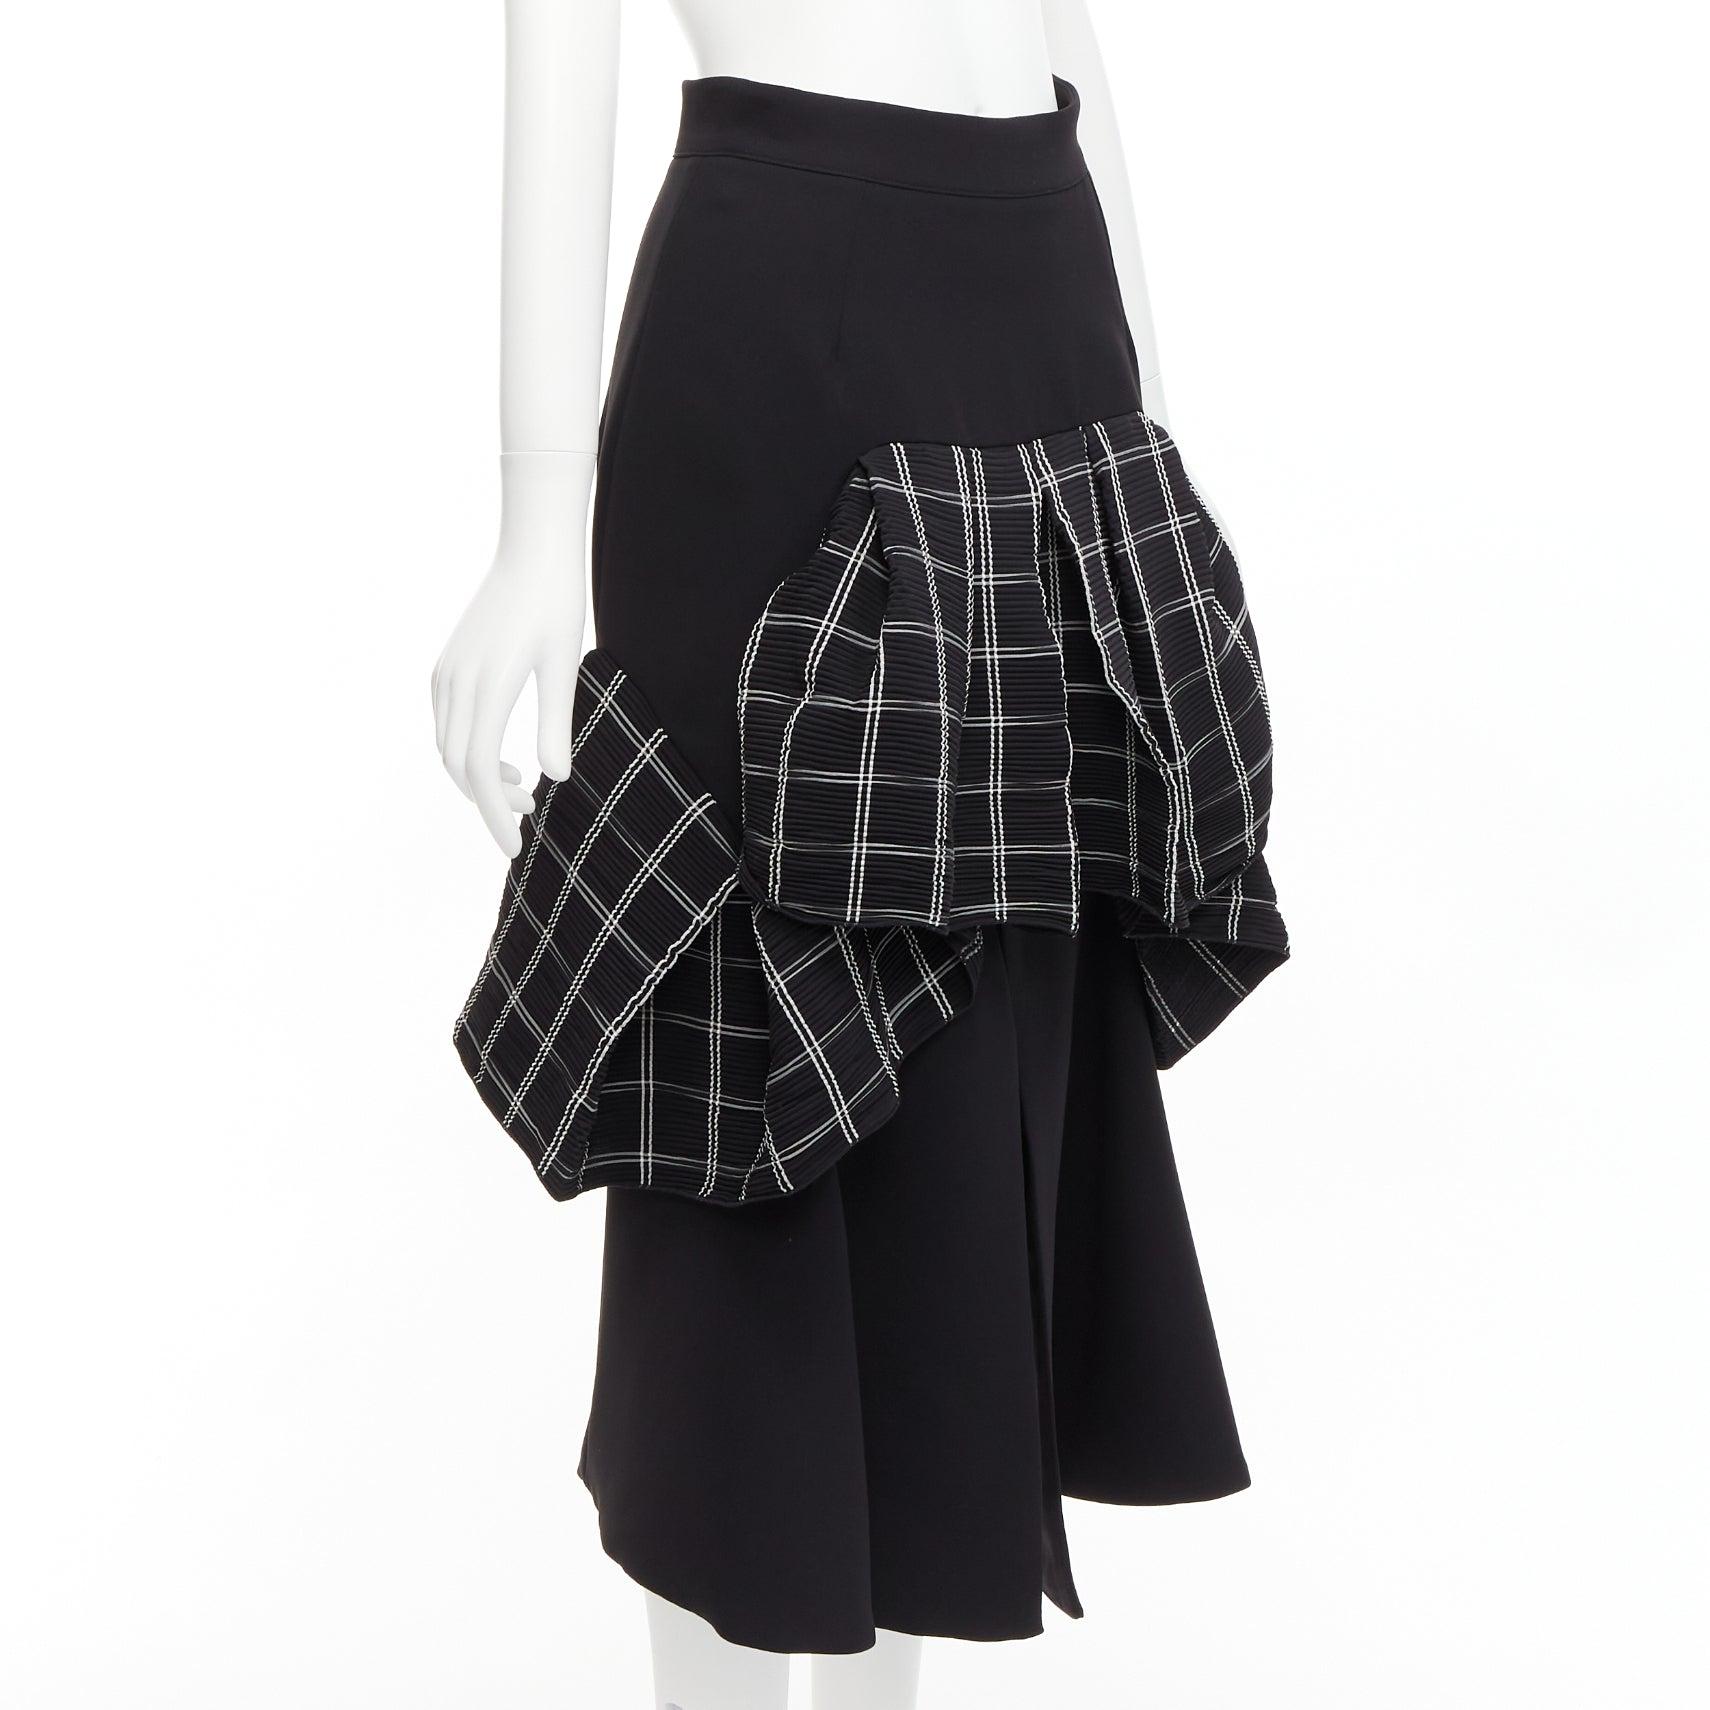 MATICEVSKI 2021 Emblazon black white checked pleats ruffle skirt AU10 L
Reference: KEDG/A00280
Brand: Maticevski
Model: Emblazon
Collection: SS 2021
Material: Polyester
Color: Black, White
Pattern: Checkered
Closure: Zip
Lining: Black Fabric
Extra